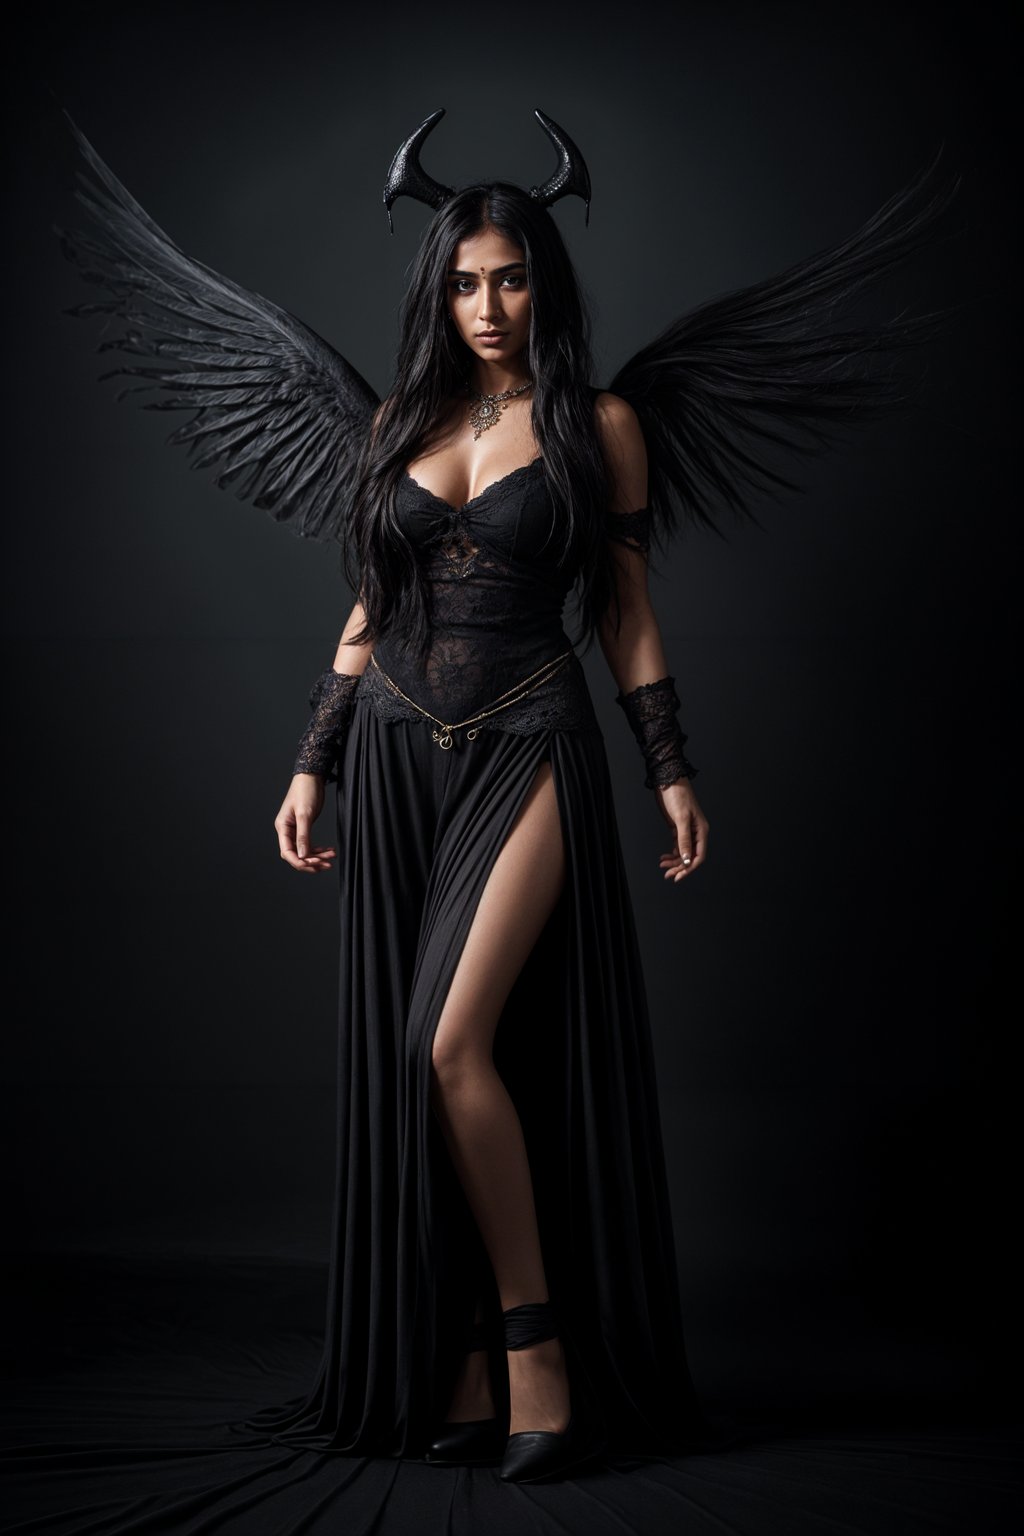 a woman dressed as an angel poses for a picture, dark angel, angel knight gothic girl, dark gothic dress, very sexy devil outfit, full body devil woman, gothic woman dressed in black and red, megan fox witch queen, raven winged female vampire, villainess has black angel wings, gothic outfit, tall female angel, gothic dress, fallen angel, winged woman angel, fishnet stockings